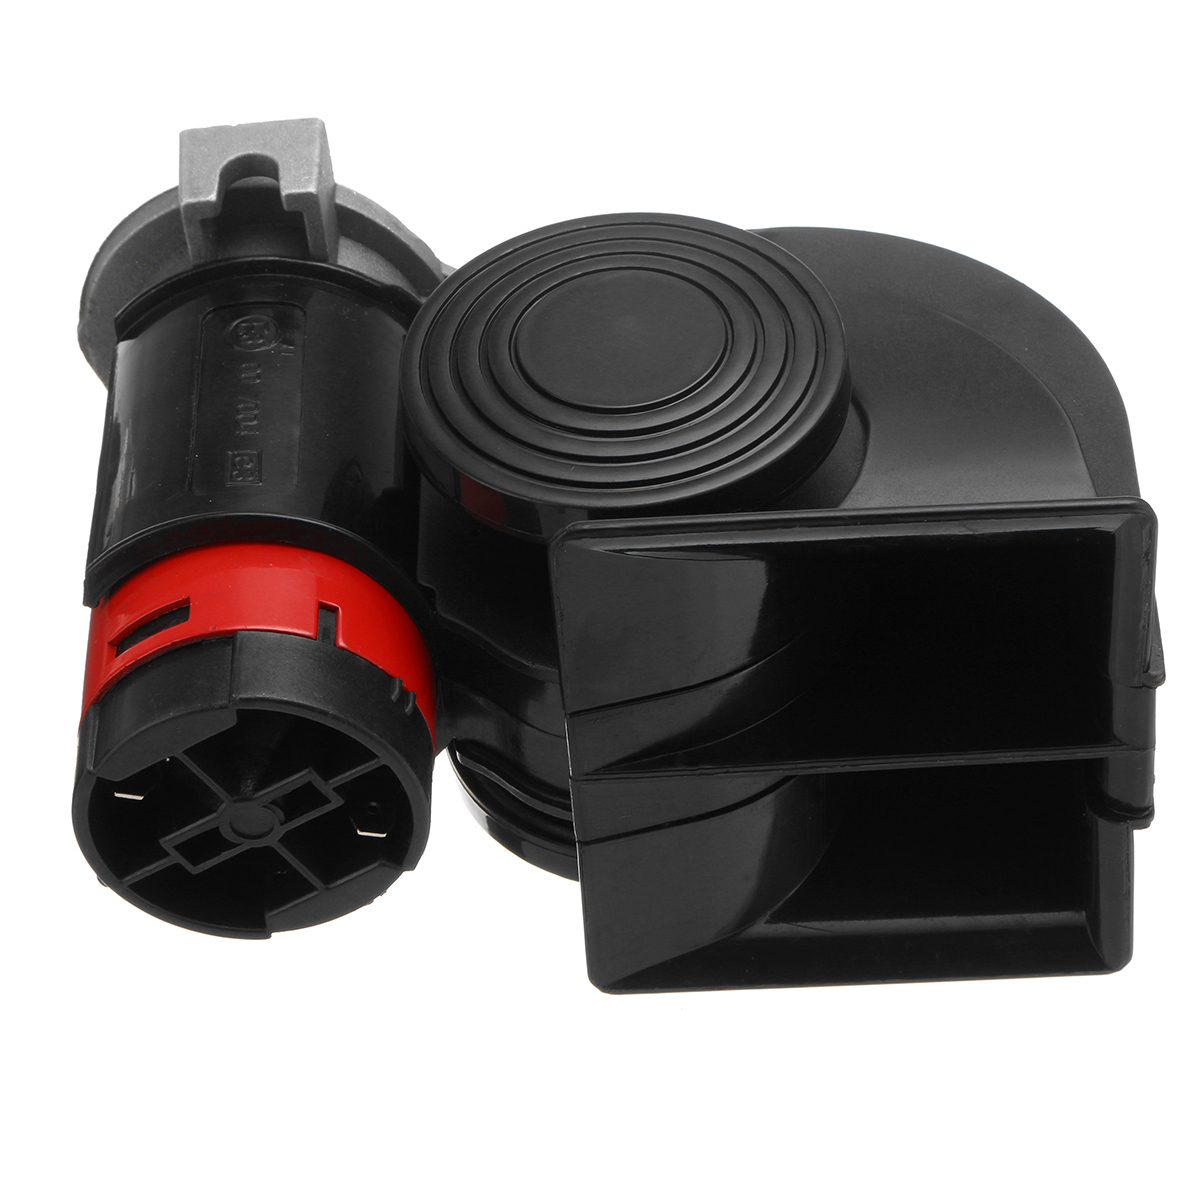 

12V 139dB Electric Pump Air Loud Horn Compact Dual Tone for Car Truck Motorcycle